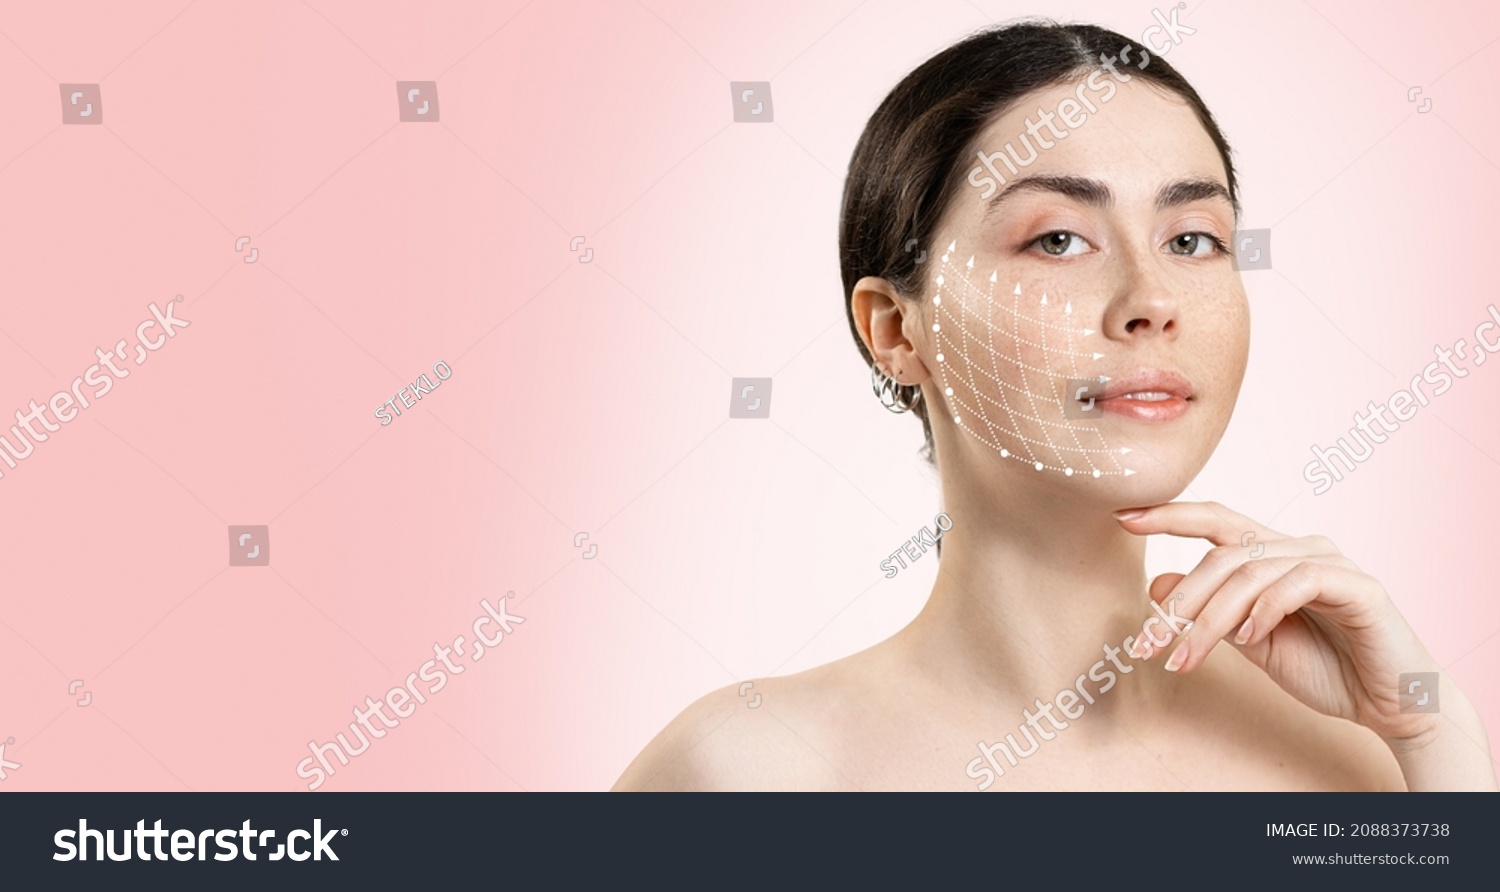 Banner of professional cosmetology. Portrait of a young beautiful woman with a mesh of thread lifting on her face. Pink background. Copy space. #2088373738